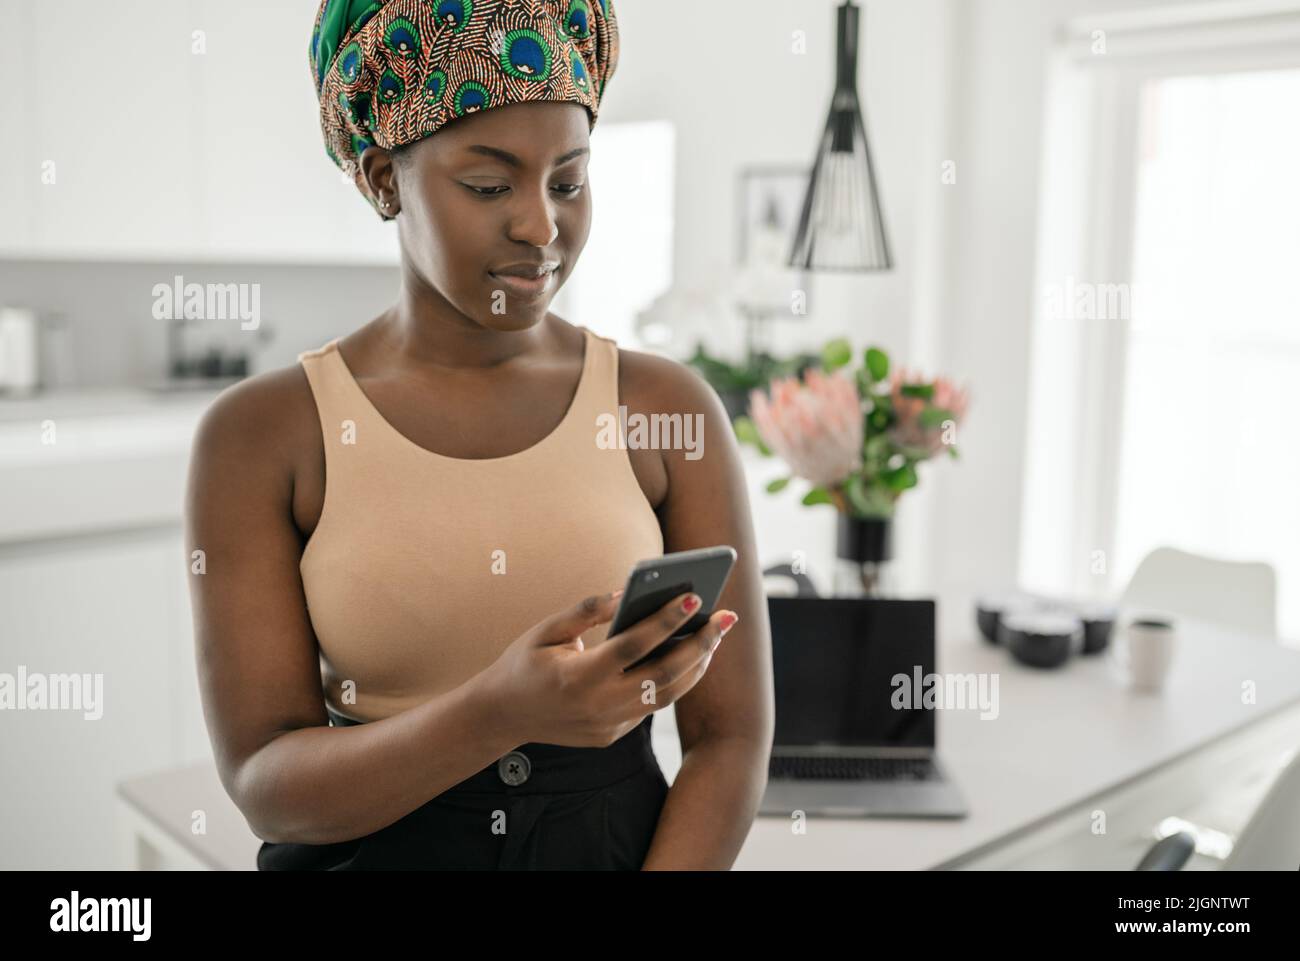 Beautiful Black African woman working at home, smiling, using mobile smart phone, wearing traditional headscarf Stock Photo